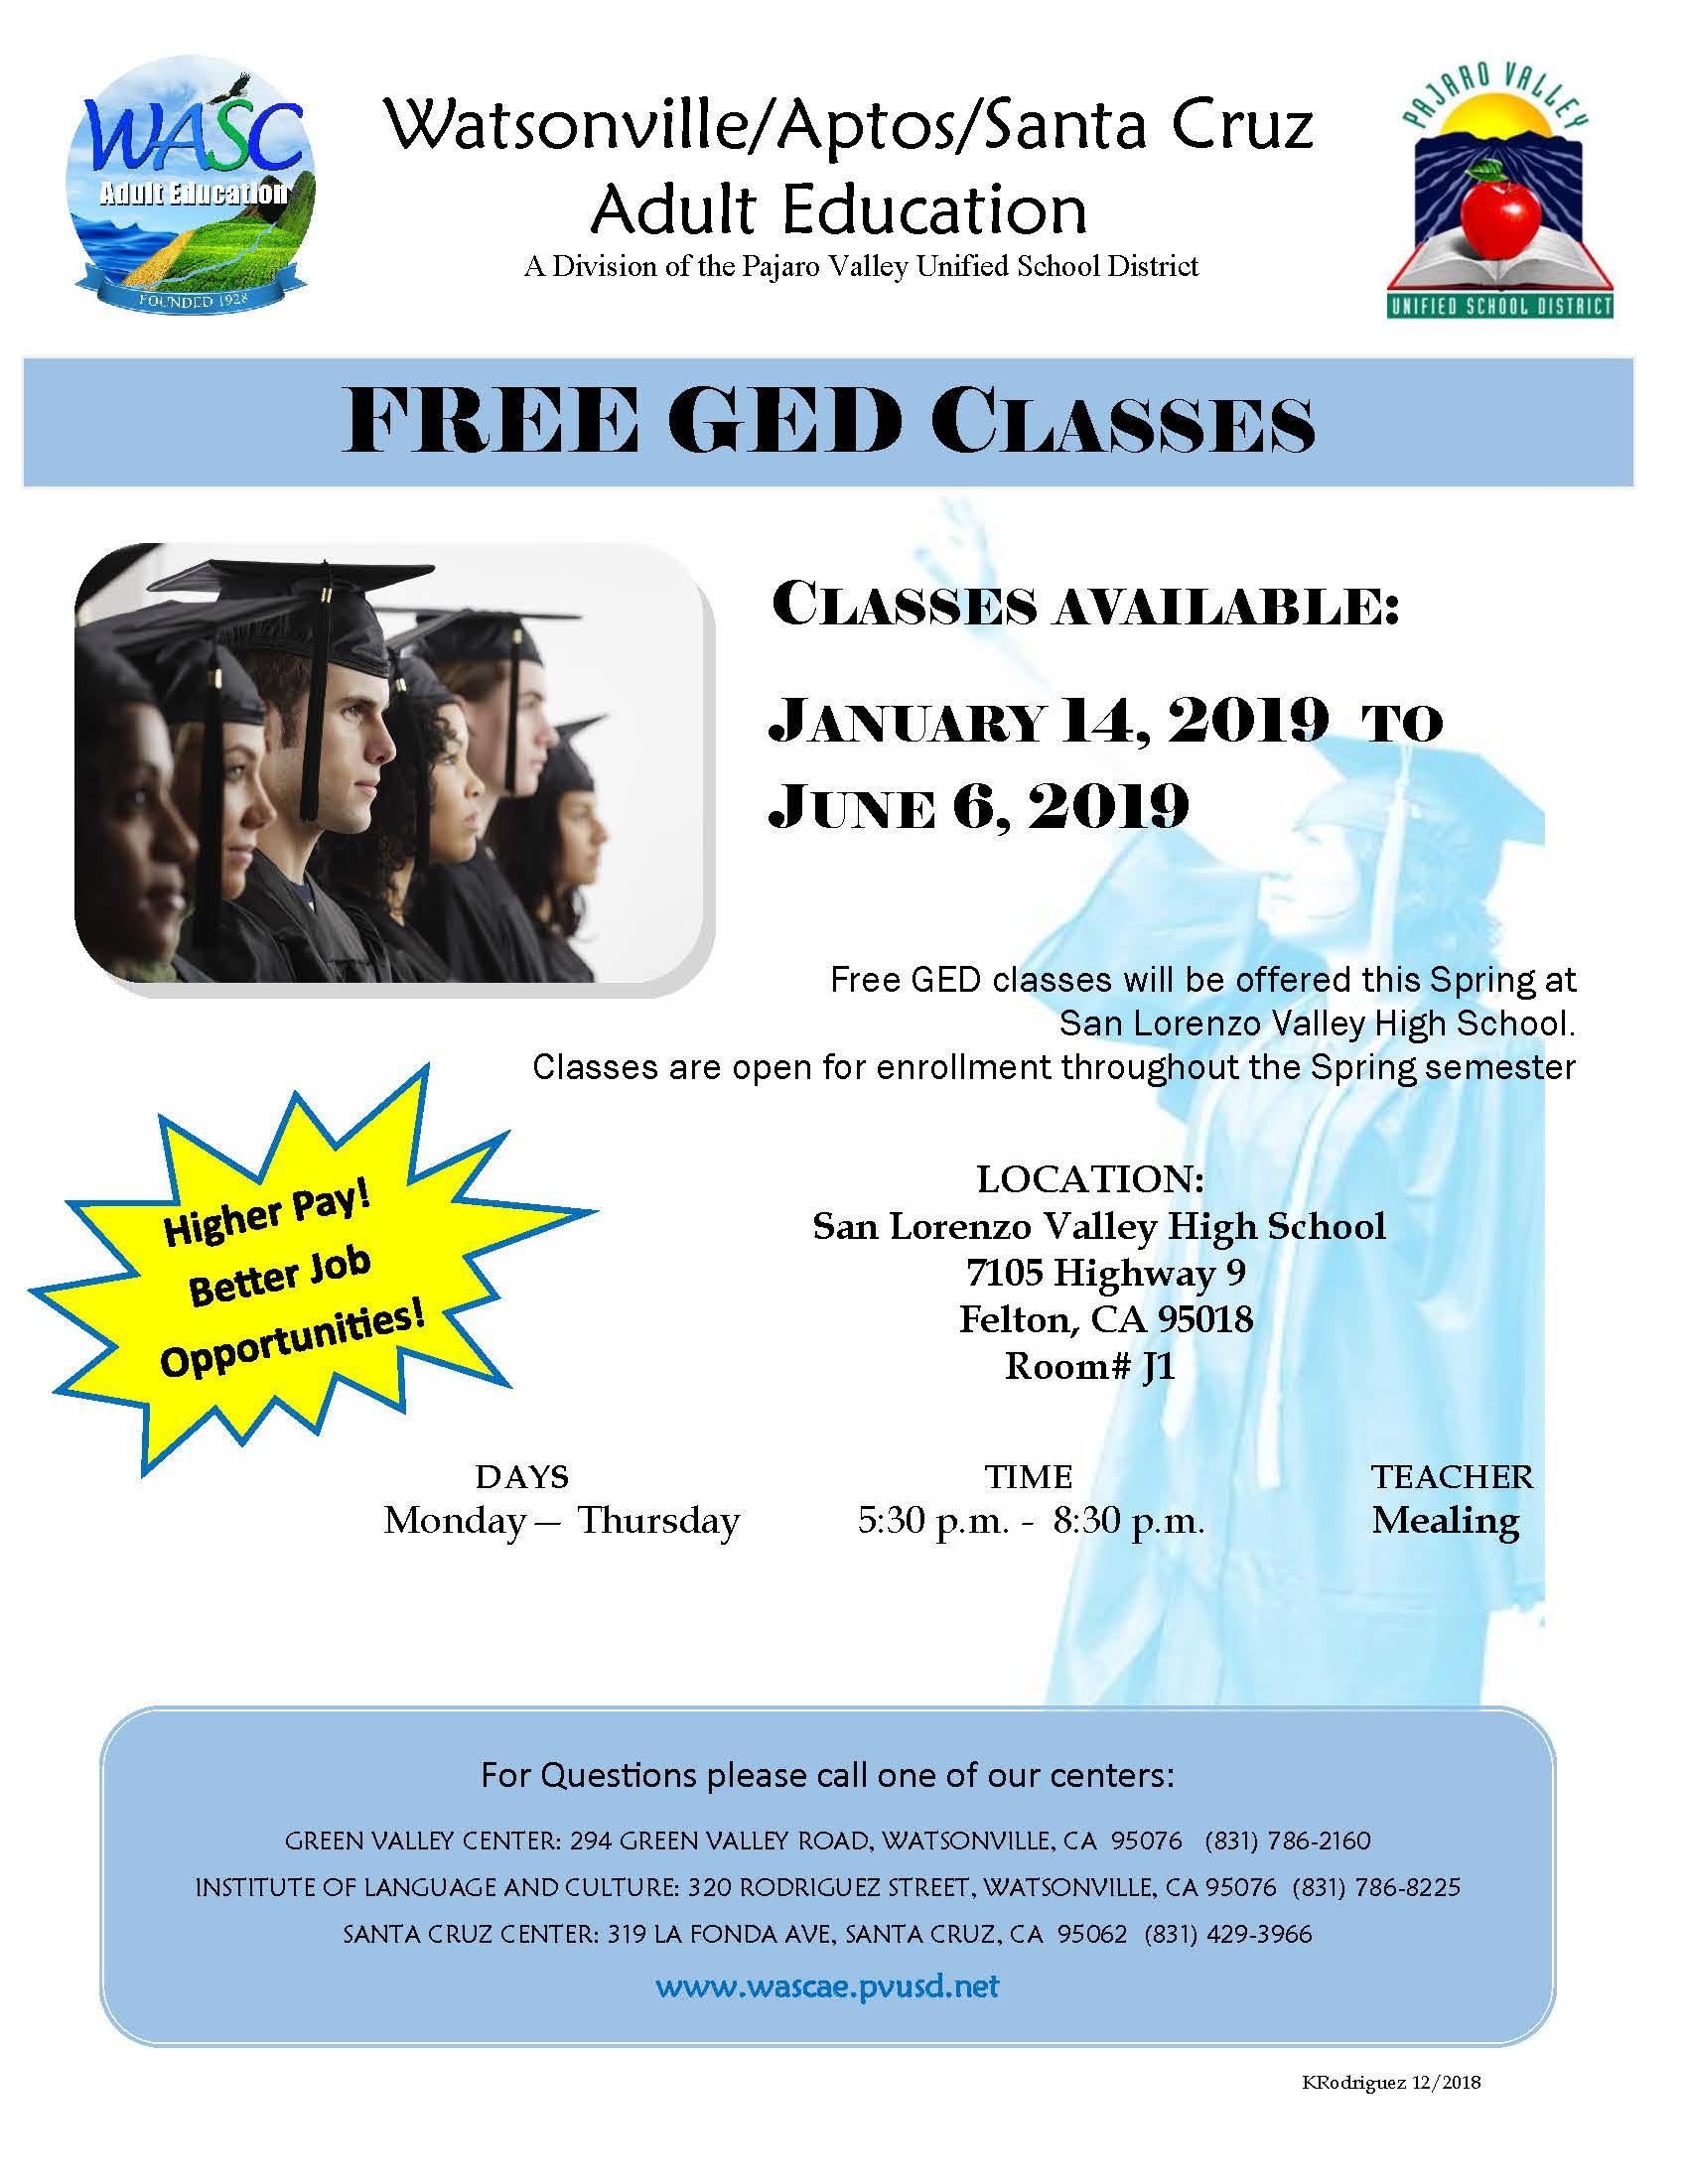 Free GED Classes at SLVHS call429-3966